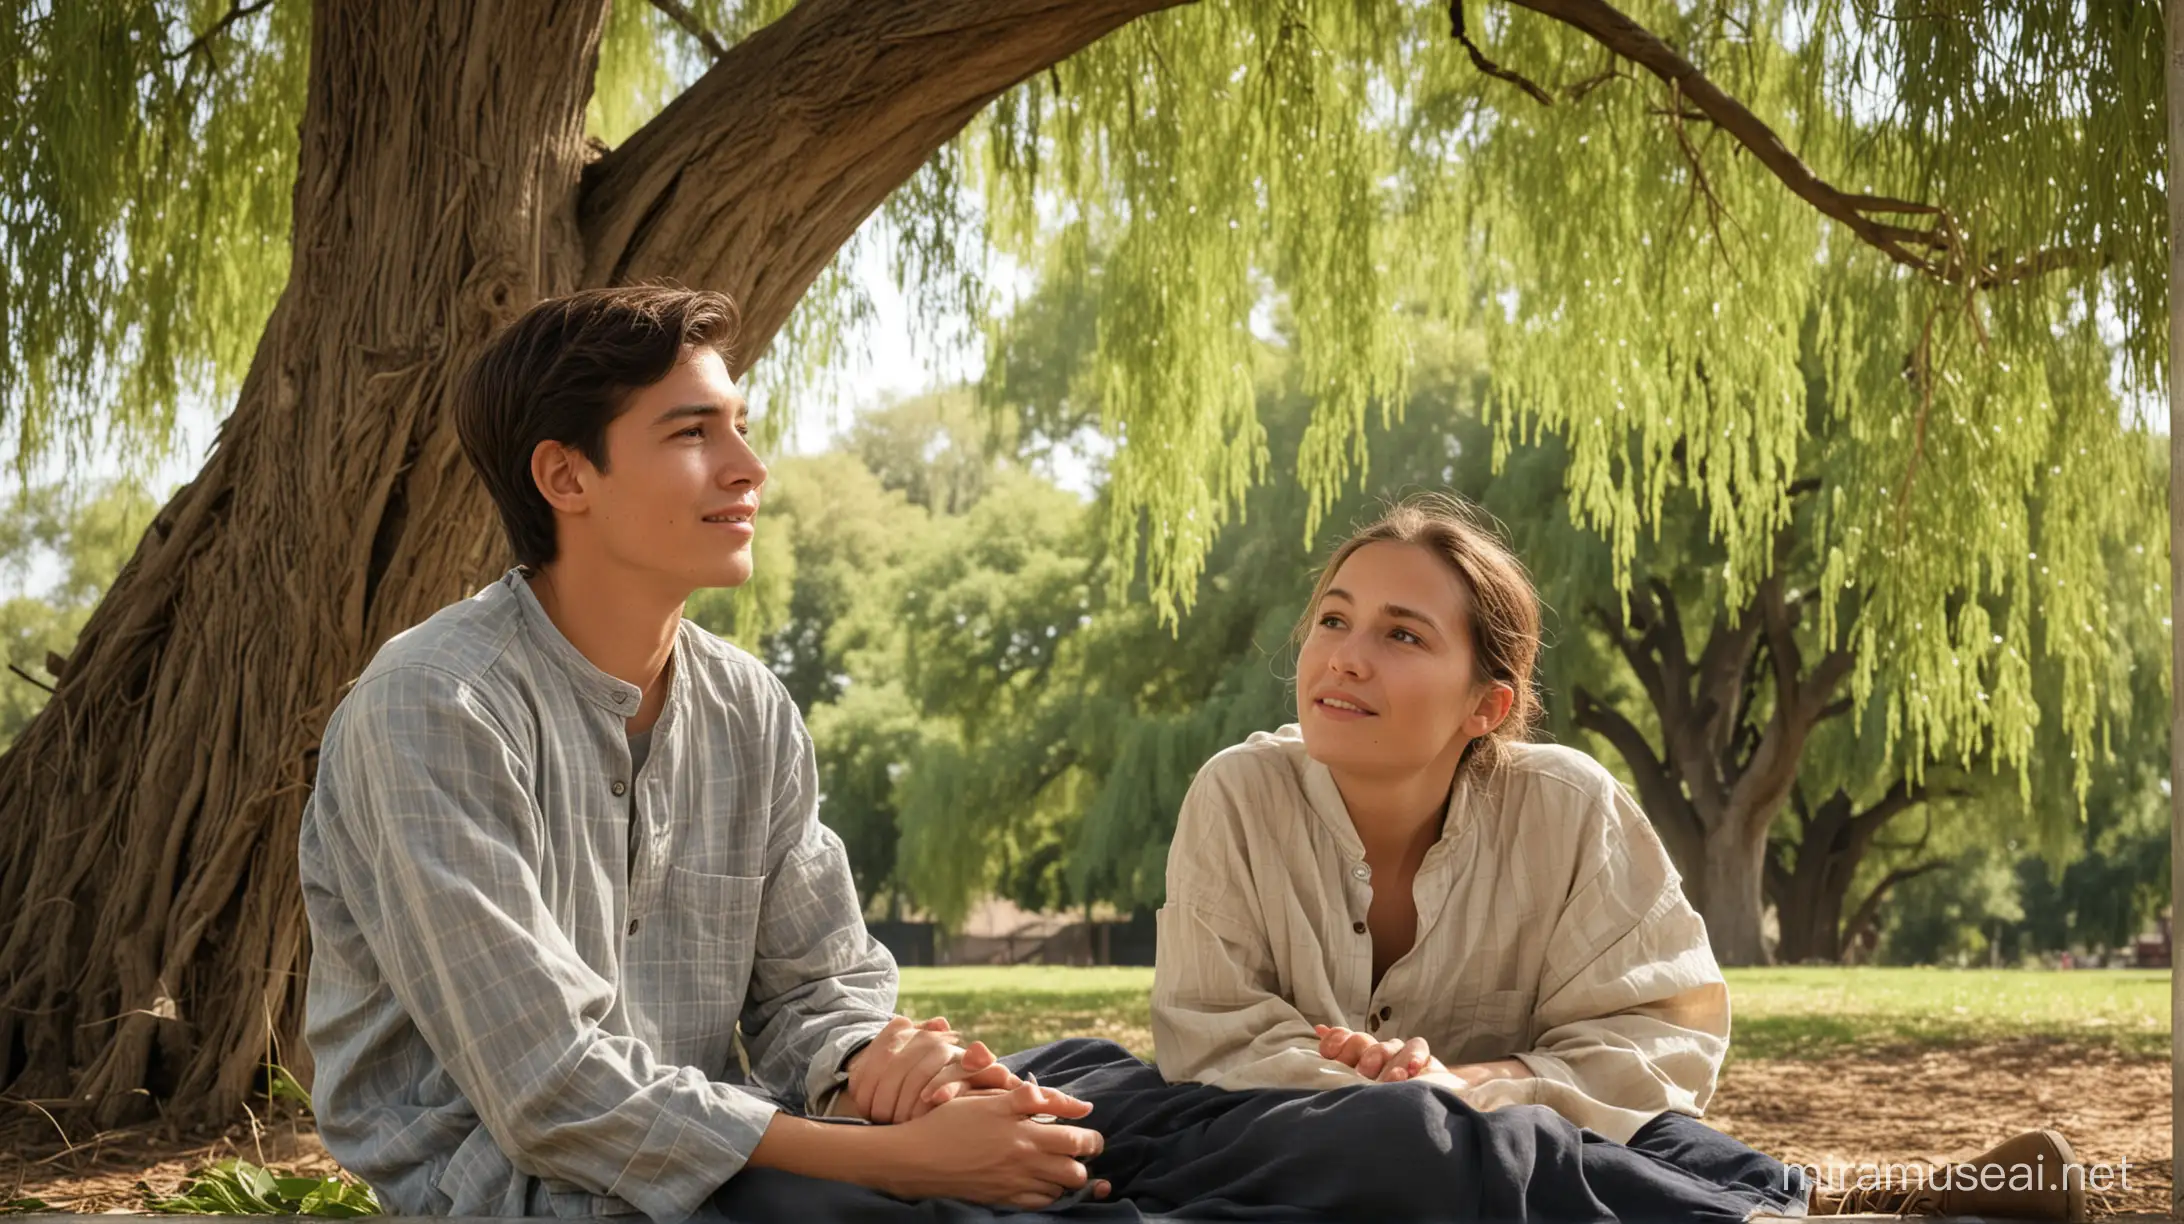 Hope and Recognition (Day): lio age 25 years old

Lio sits under the willow tree, listening intently to Hooldy's story.
Hooldy gestures towards the sky with a hopeful expression.
A look of understanding dawns on Lio's face.